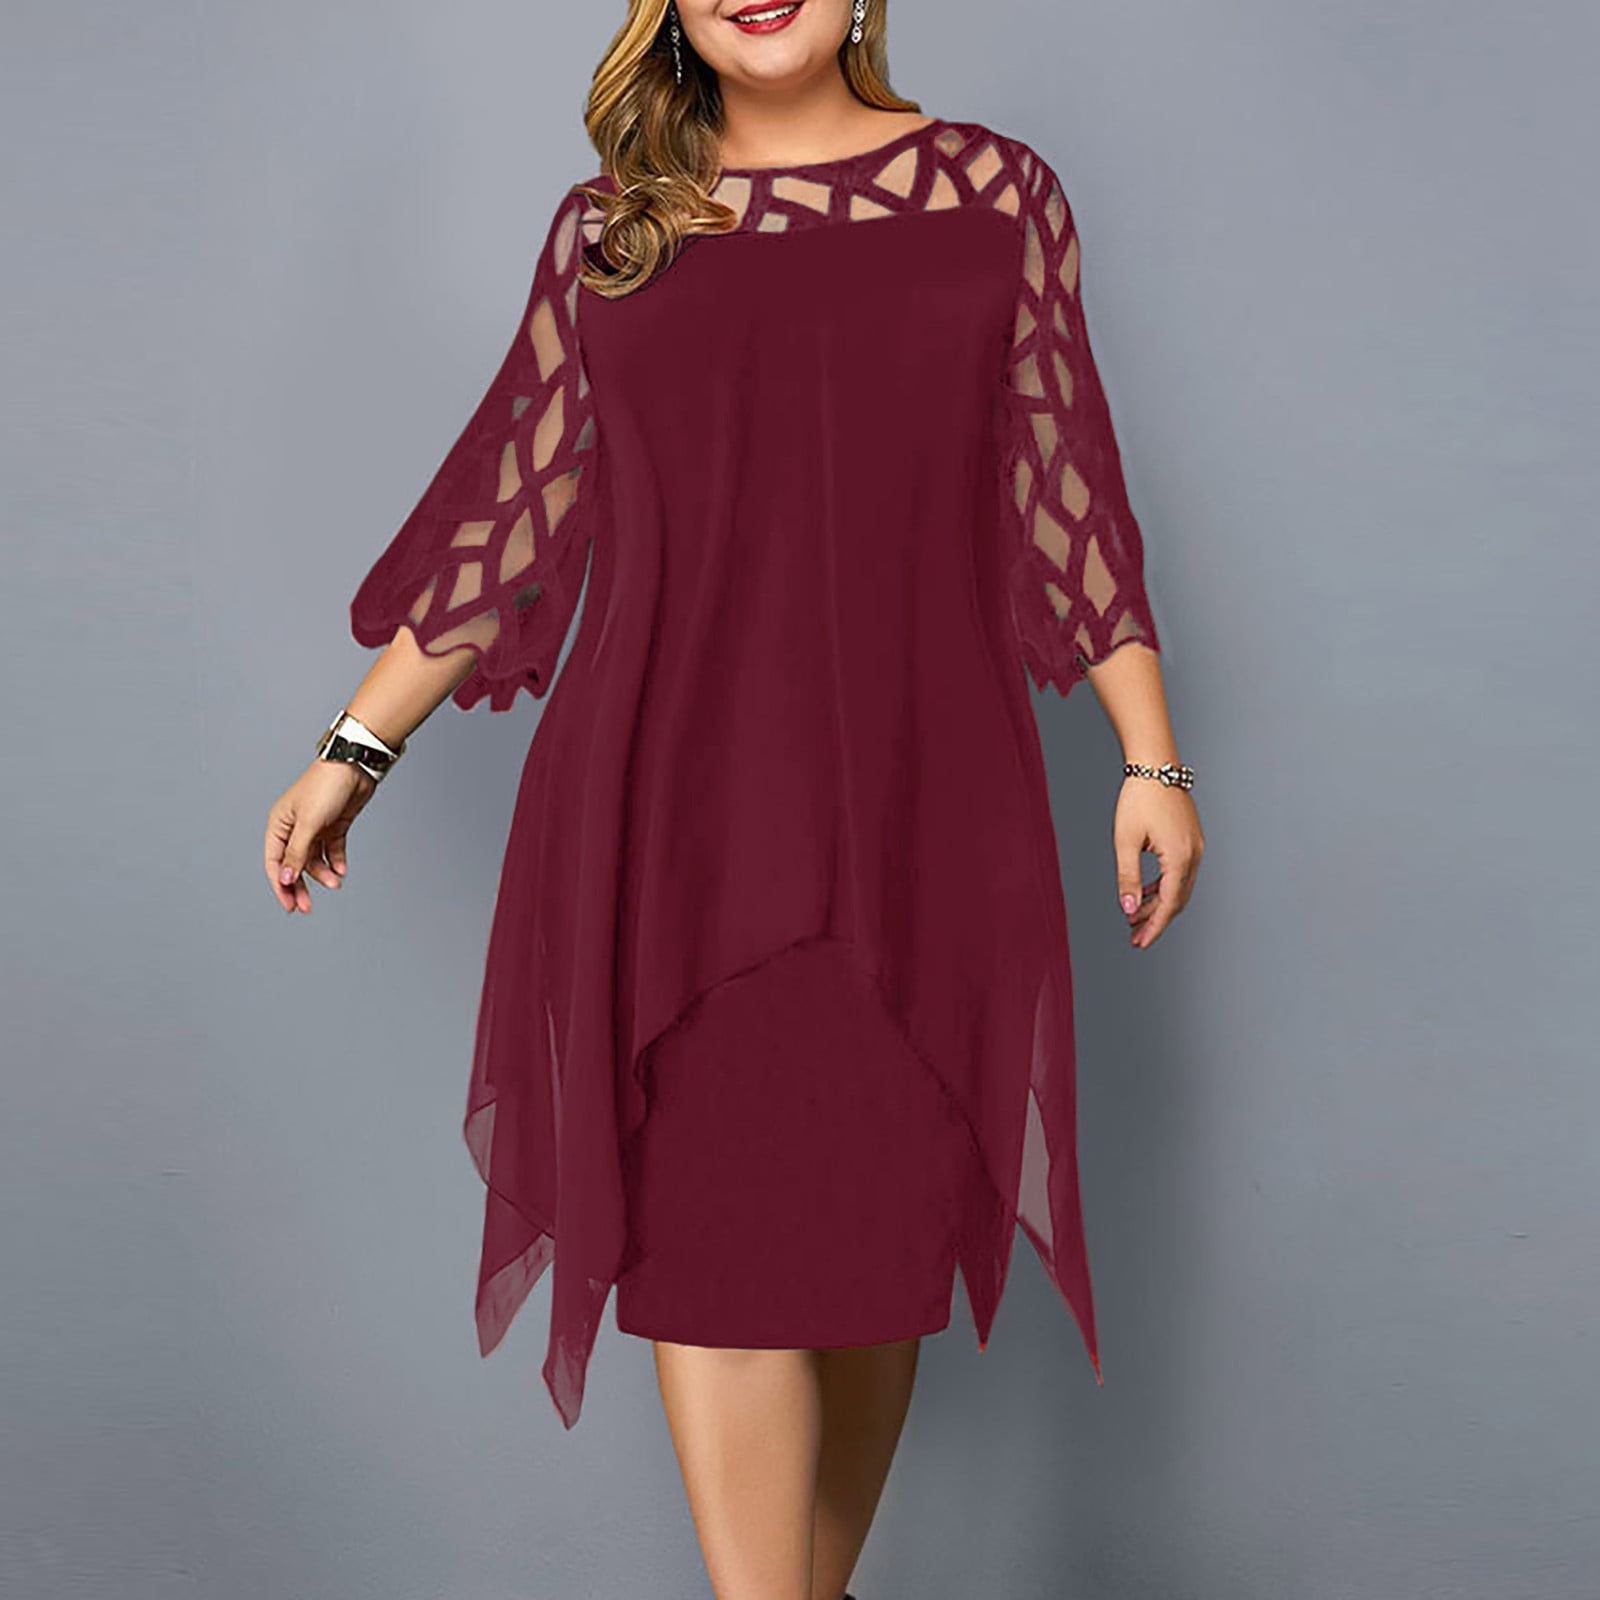 Plus Size Wedding Guest Dresses for Women Casual Long Sleeve A-Line ...